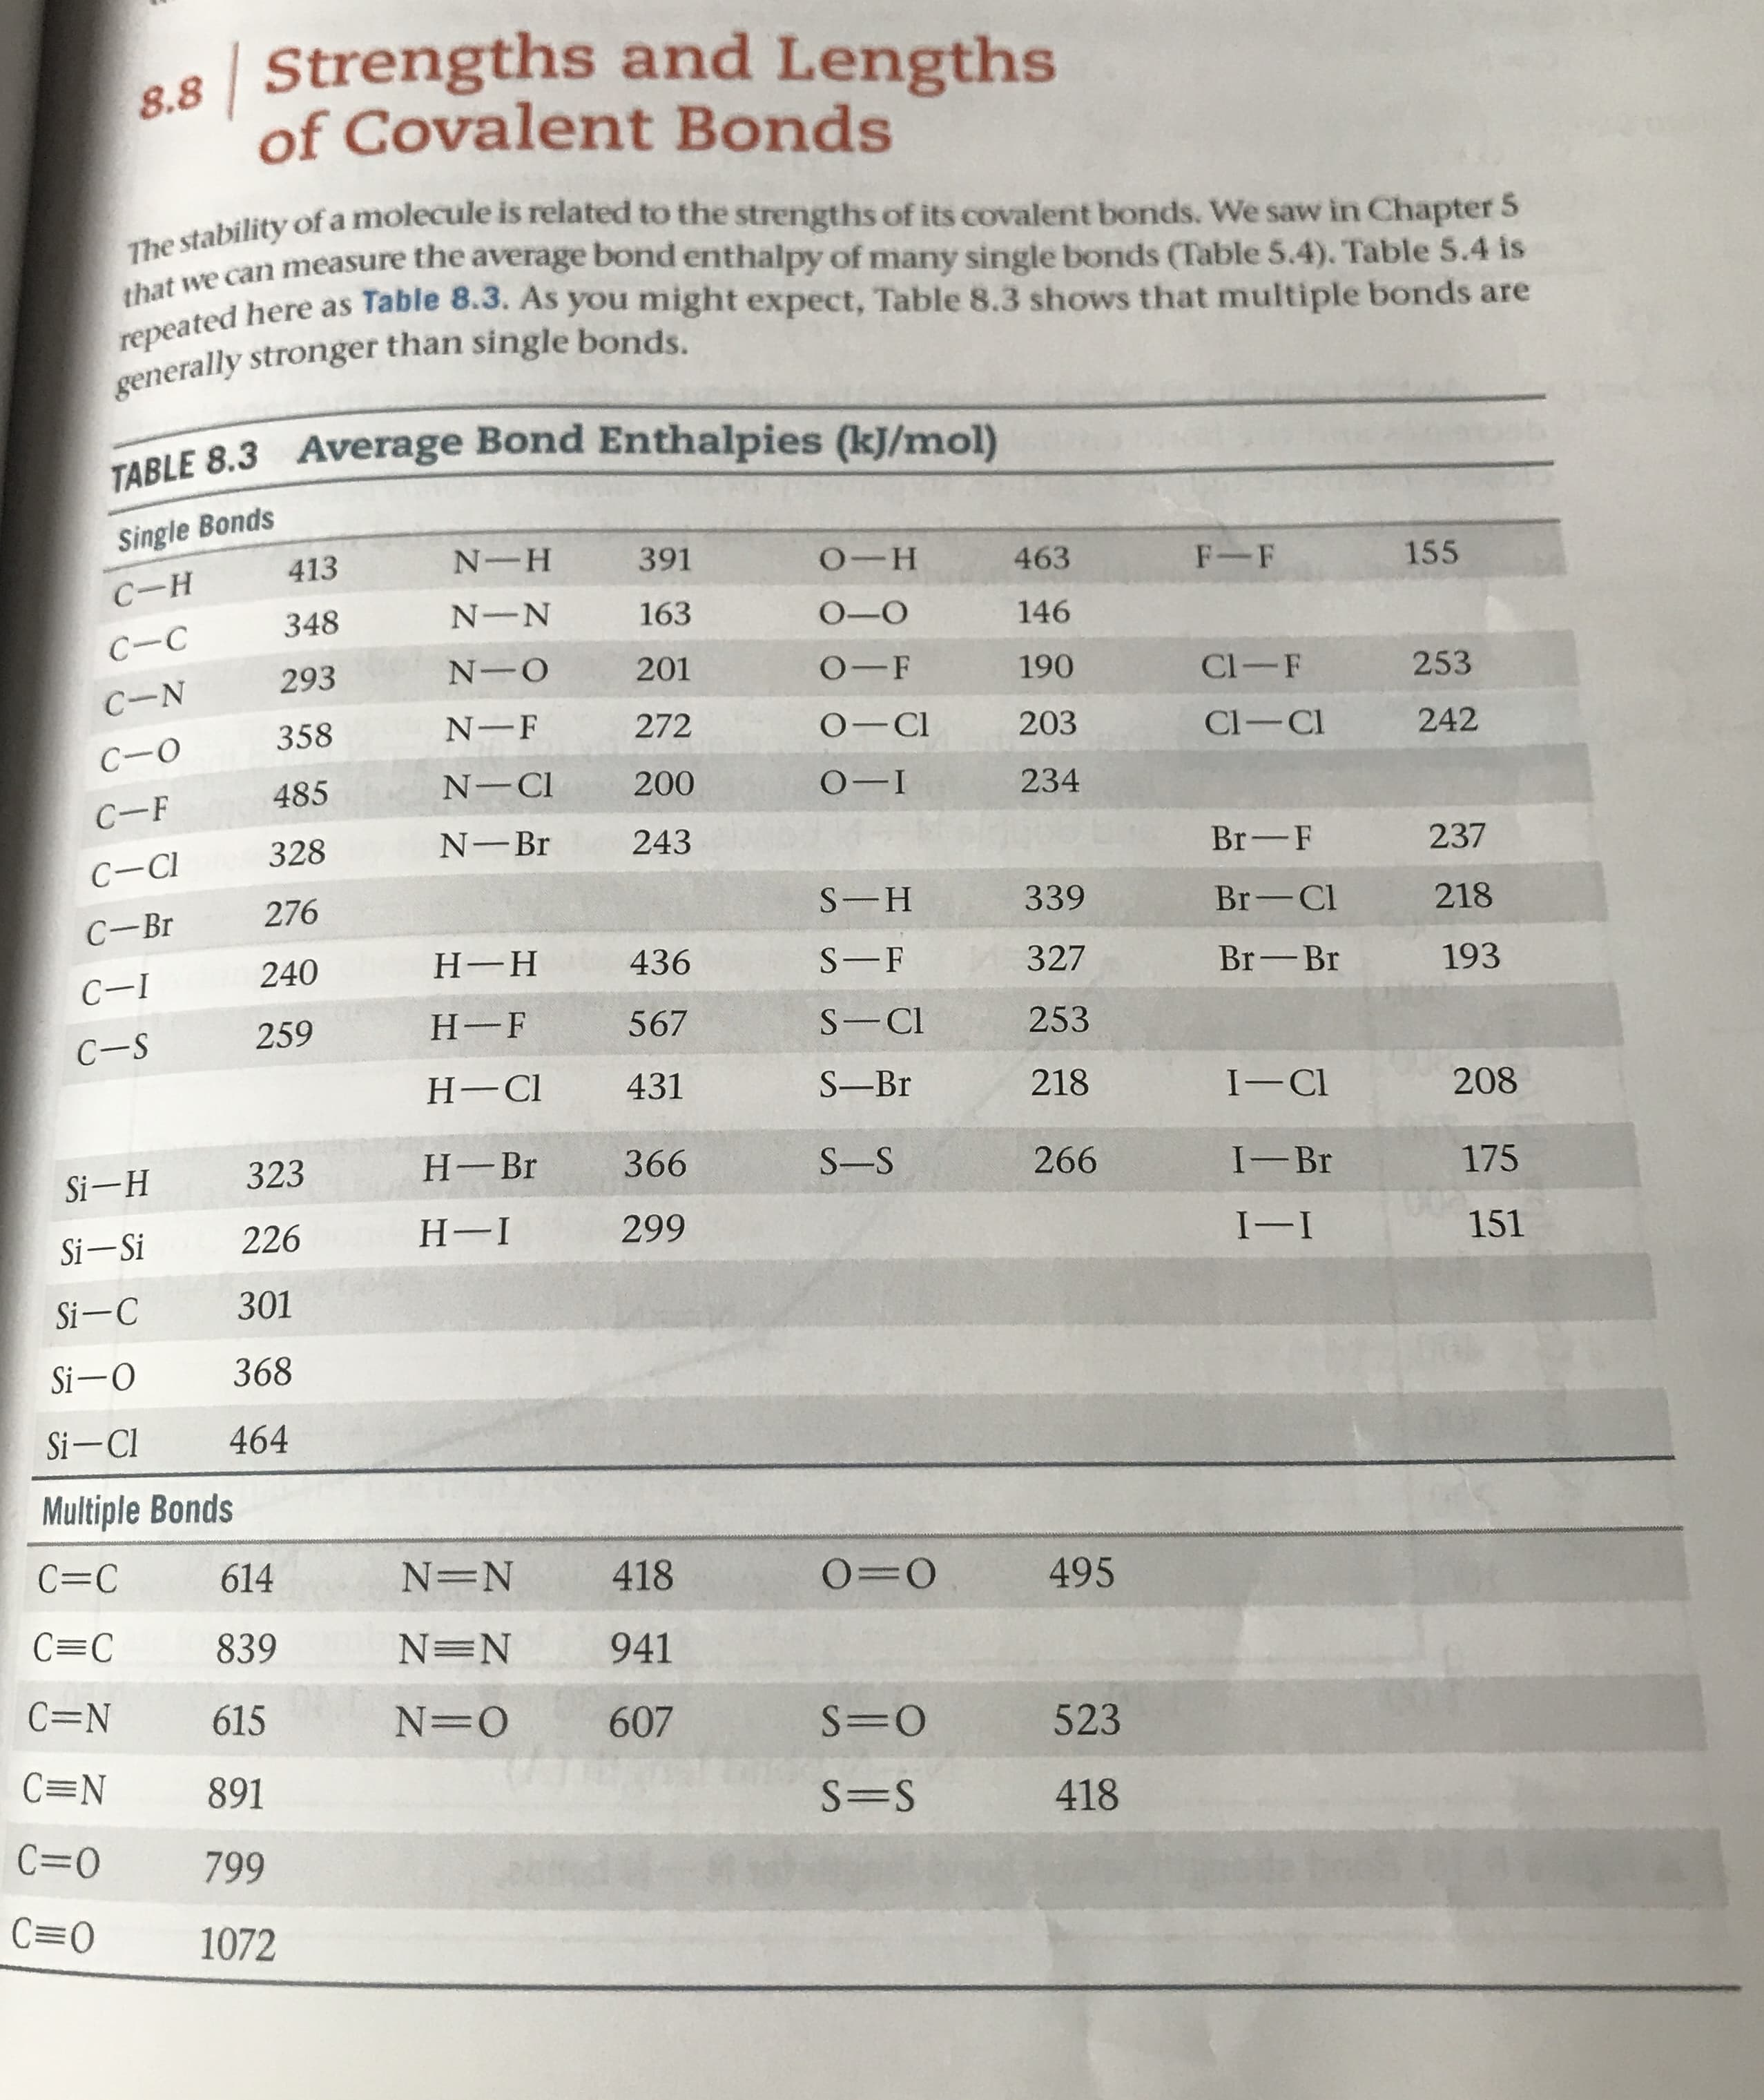 | Strengths and Lengths
8.8
of Covalent Bonds
The stability of a molecule is related to the strengths of its covalent bonds. We saw in Chapter 5
that we can measure the average bond enthalpy of many single bonds (Table 5.4). Table 5.4 is
repeated here as Table 8.3. As you might expect, Table 8.3 shows that multiple bonds are
generally stronger than single bonds
TABLE 8.3 Average Bond Enthalpies (k)J/mol)
Single Bonds
413
N-H
391
о--н
F-F
463
155
С-н
N-N
163
348
О-О
146
С-с
N-O
201
293
О-F
190
Cl-F
253
C-N
N-F
О— СI
272
358
203
Cl-Cl
242
С-о
N-CI
200
О-1
485
234
С-F
N-Br
243
328
Br-F
237
C-CI
276
S-H
339
Br-Cl
218
С-Br
Н--Н
436
SF
240
327
Br-Br
193
С-1
Н-F
567
S-Cl
259
253
С-S
Н-СI
431
S-Br
218
I-CI
208
Н- Br
366
323
S-S
266
I--Br
Si-H
175
Н-I
299
226
Si-Si
I-I
151
301
Si-C
368
Si-O
464
Si-Cl
Multiple Bonds
C=C
614
N=N
418
O=O
495
C=C
839
N=N
941
C=N
615
N- O
607
S=O
523
C=N
891
S=S
418
C=O
799
C O
1072
